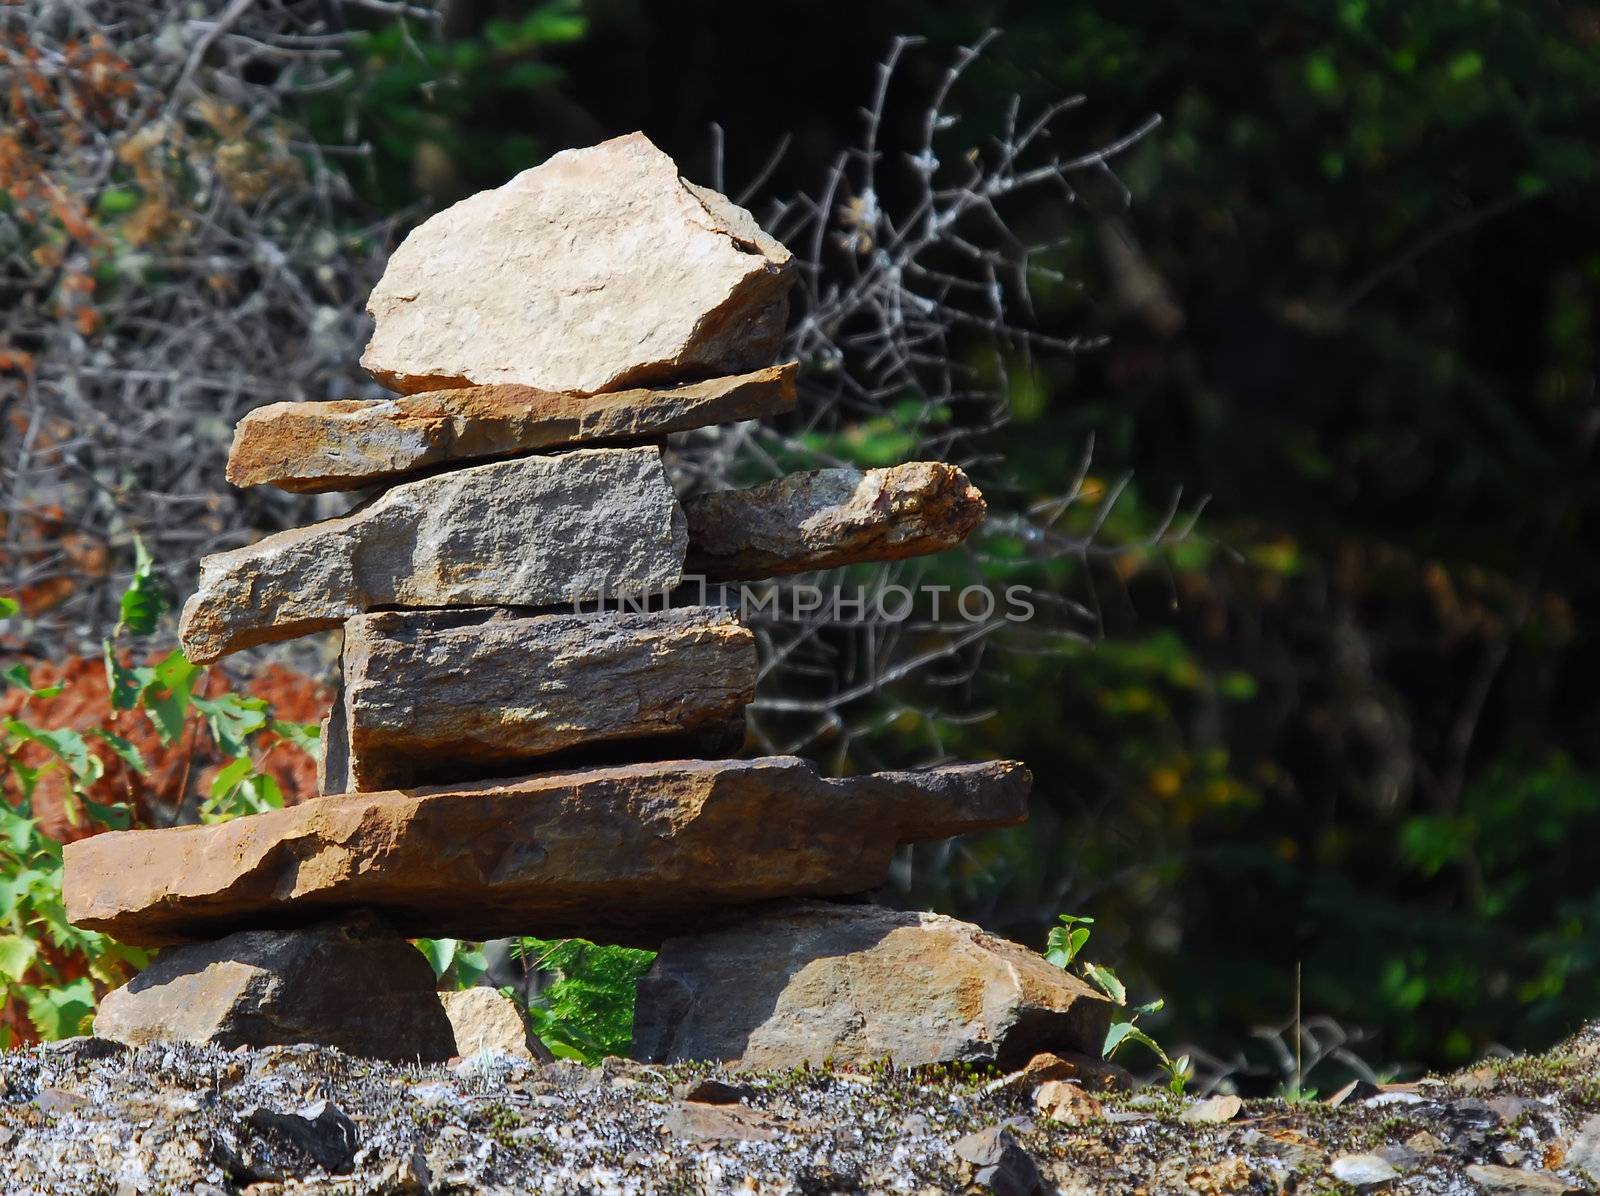 A real Inukshuk found along a northern road in canada